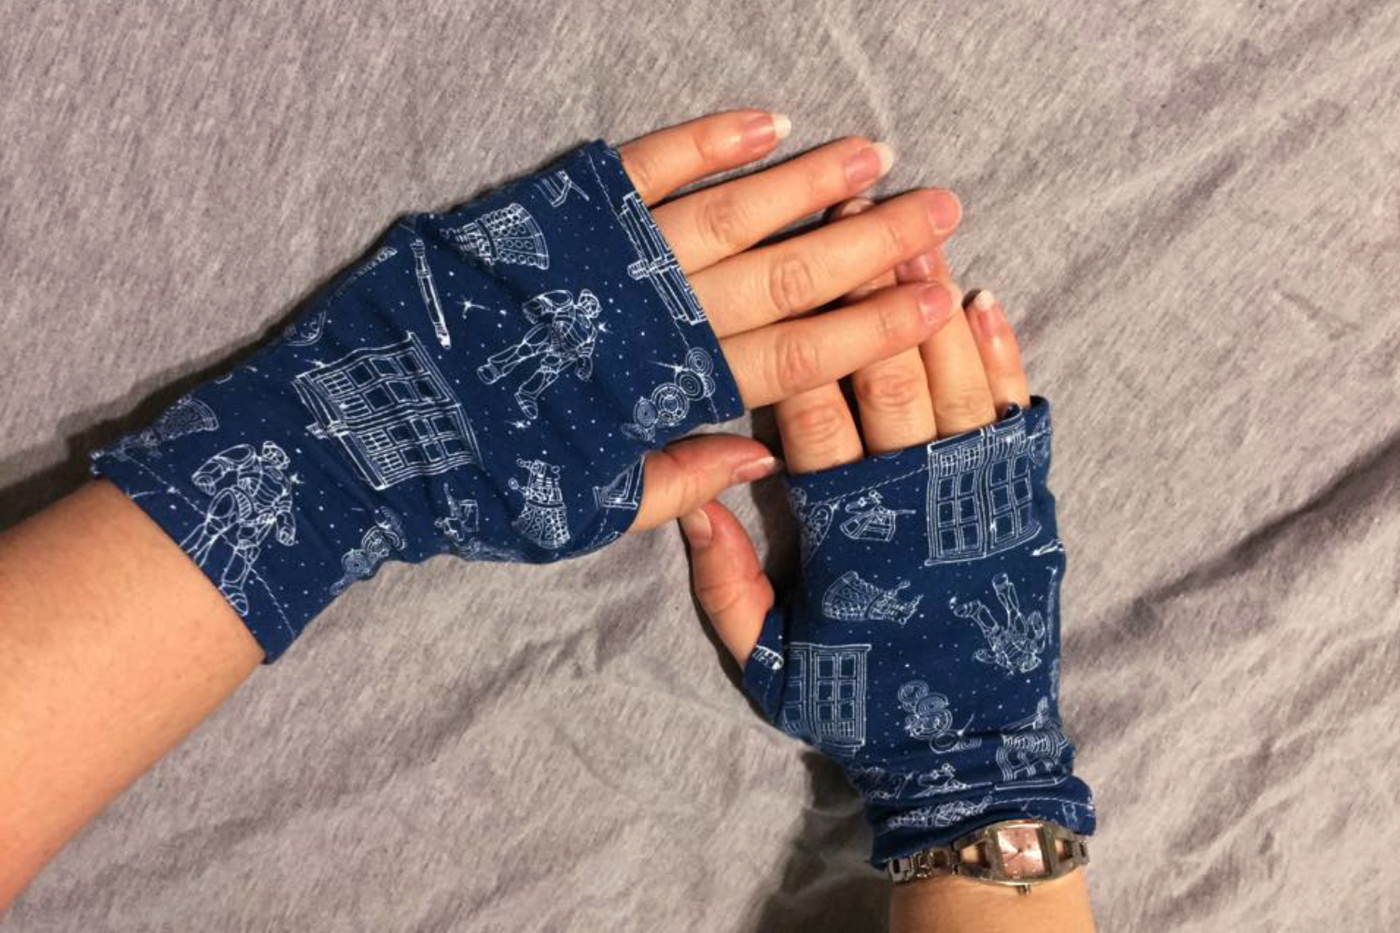 A pair of white women's hands wearing fingerless gloves in a blue and white Doctor Who fabric.